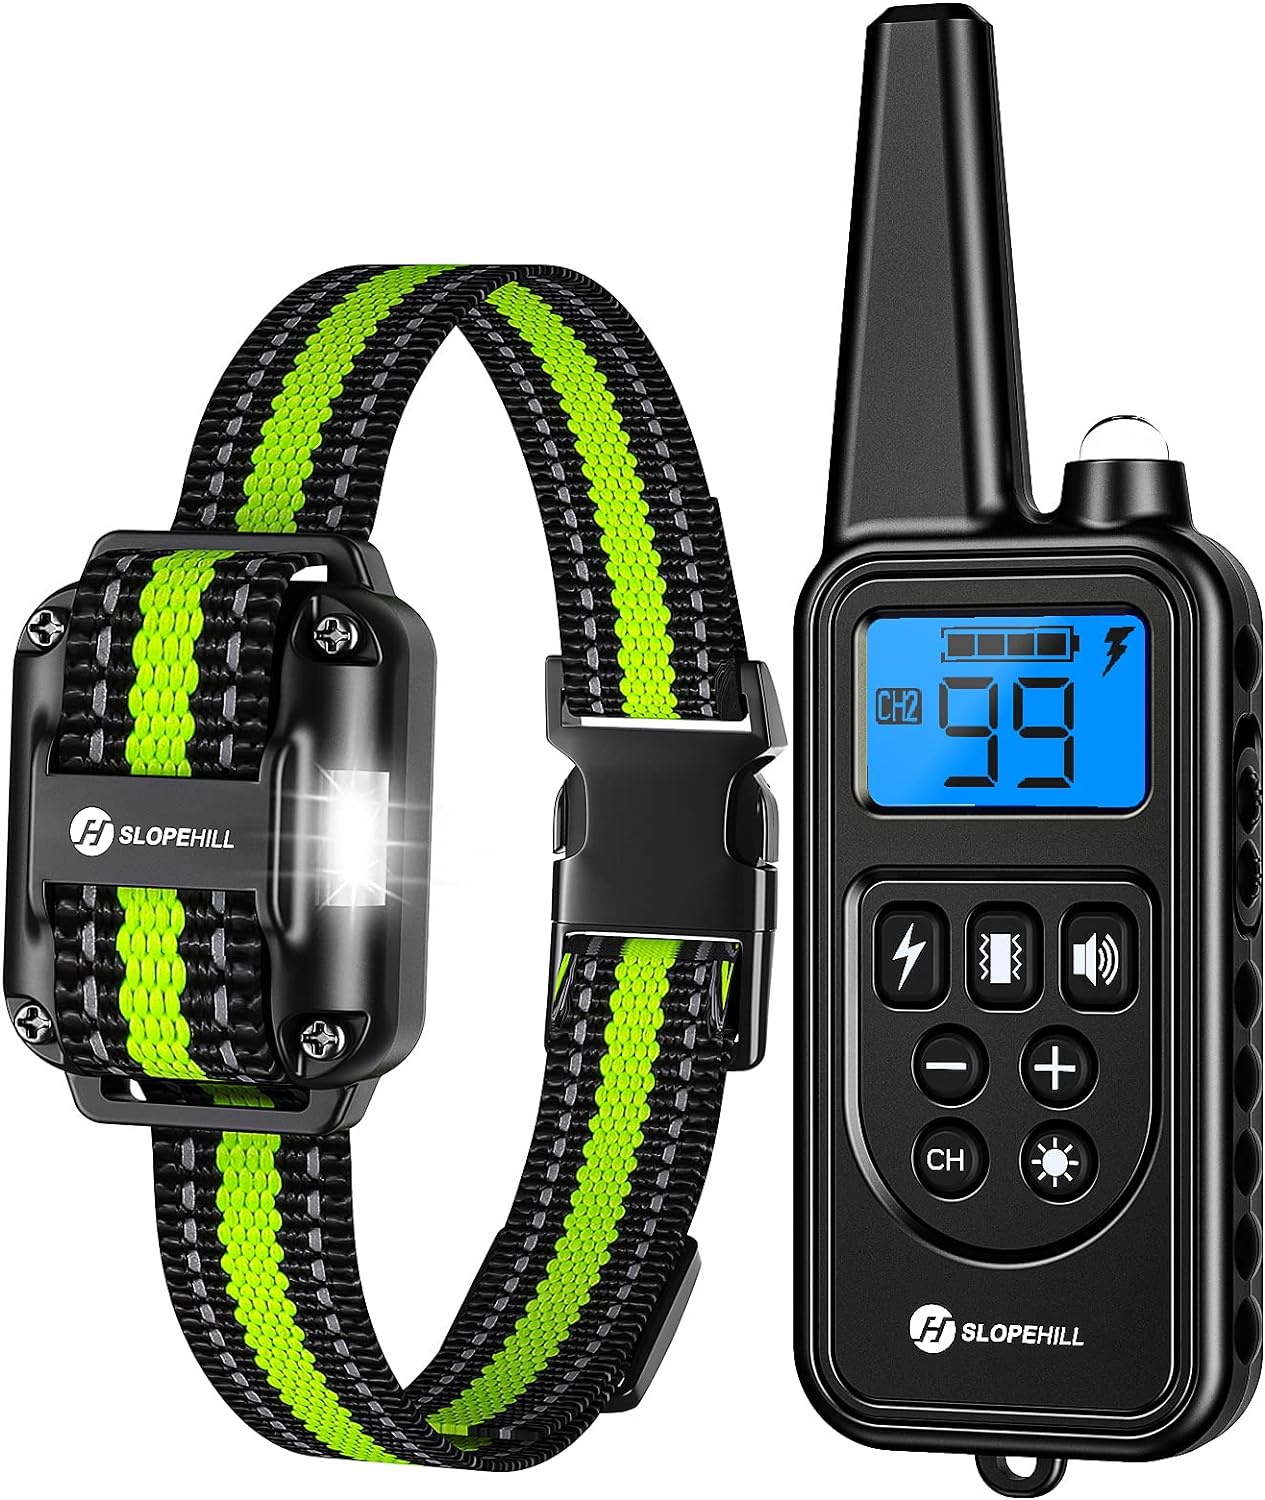 Dog Training Collar with 7 Training Modes, 2600Ft Remote Electronic Dog Shock Collar, Electric Shock Collar for Small Medium Large Dogs